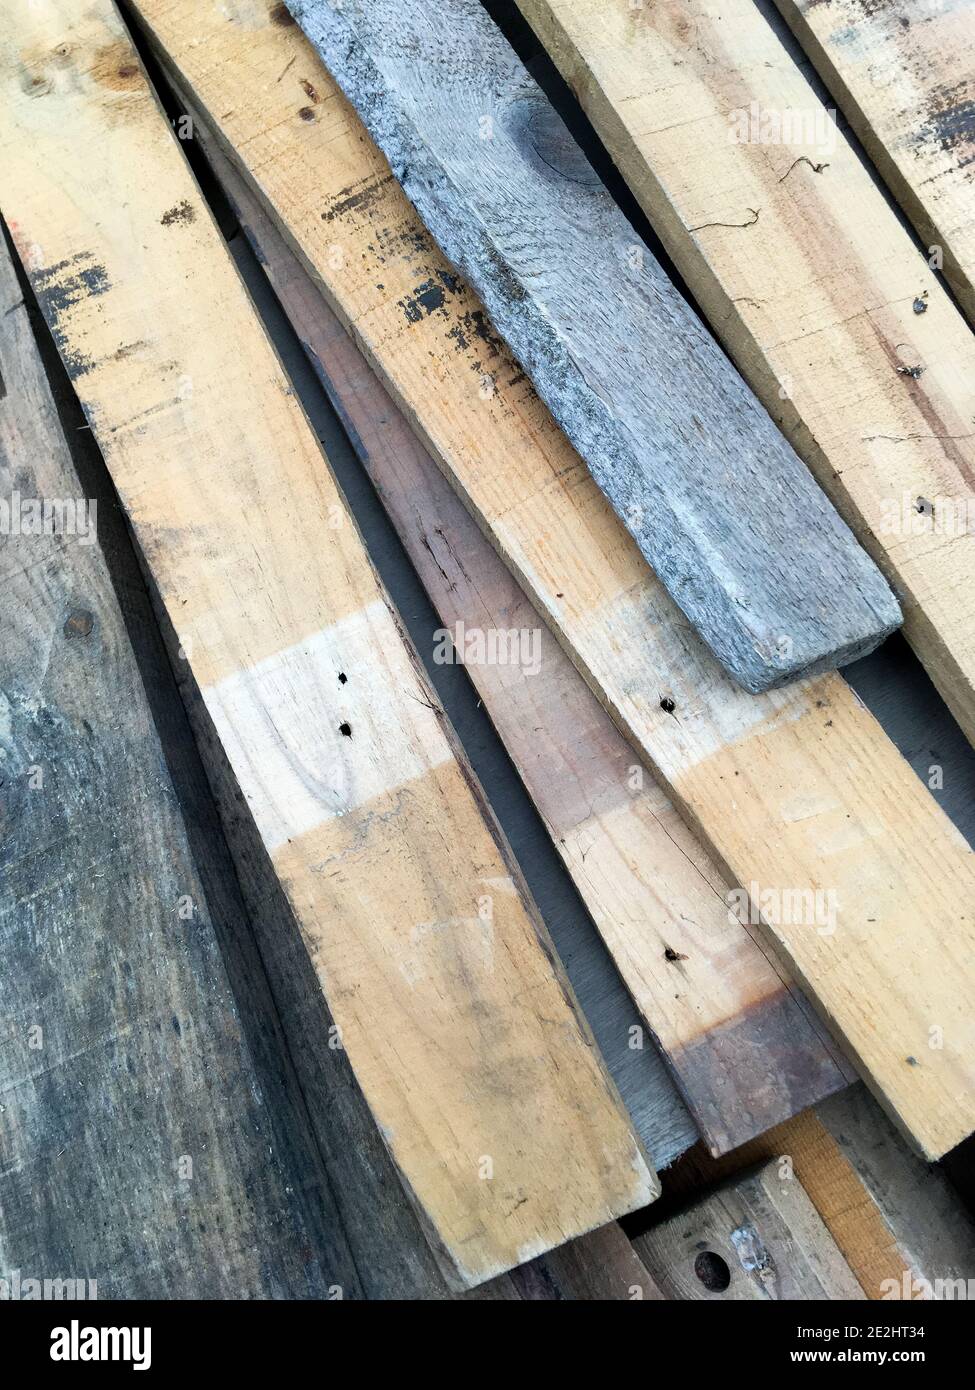 Wooden planks, France Stock Photo